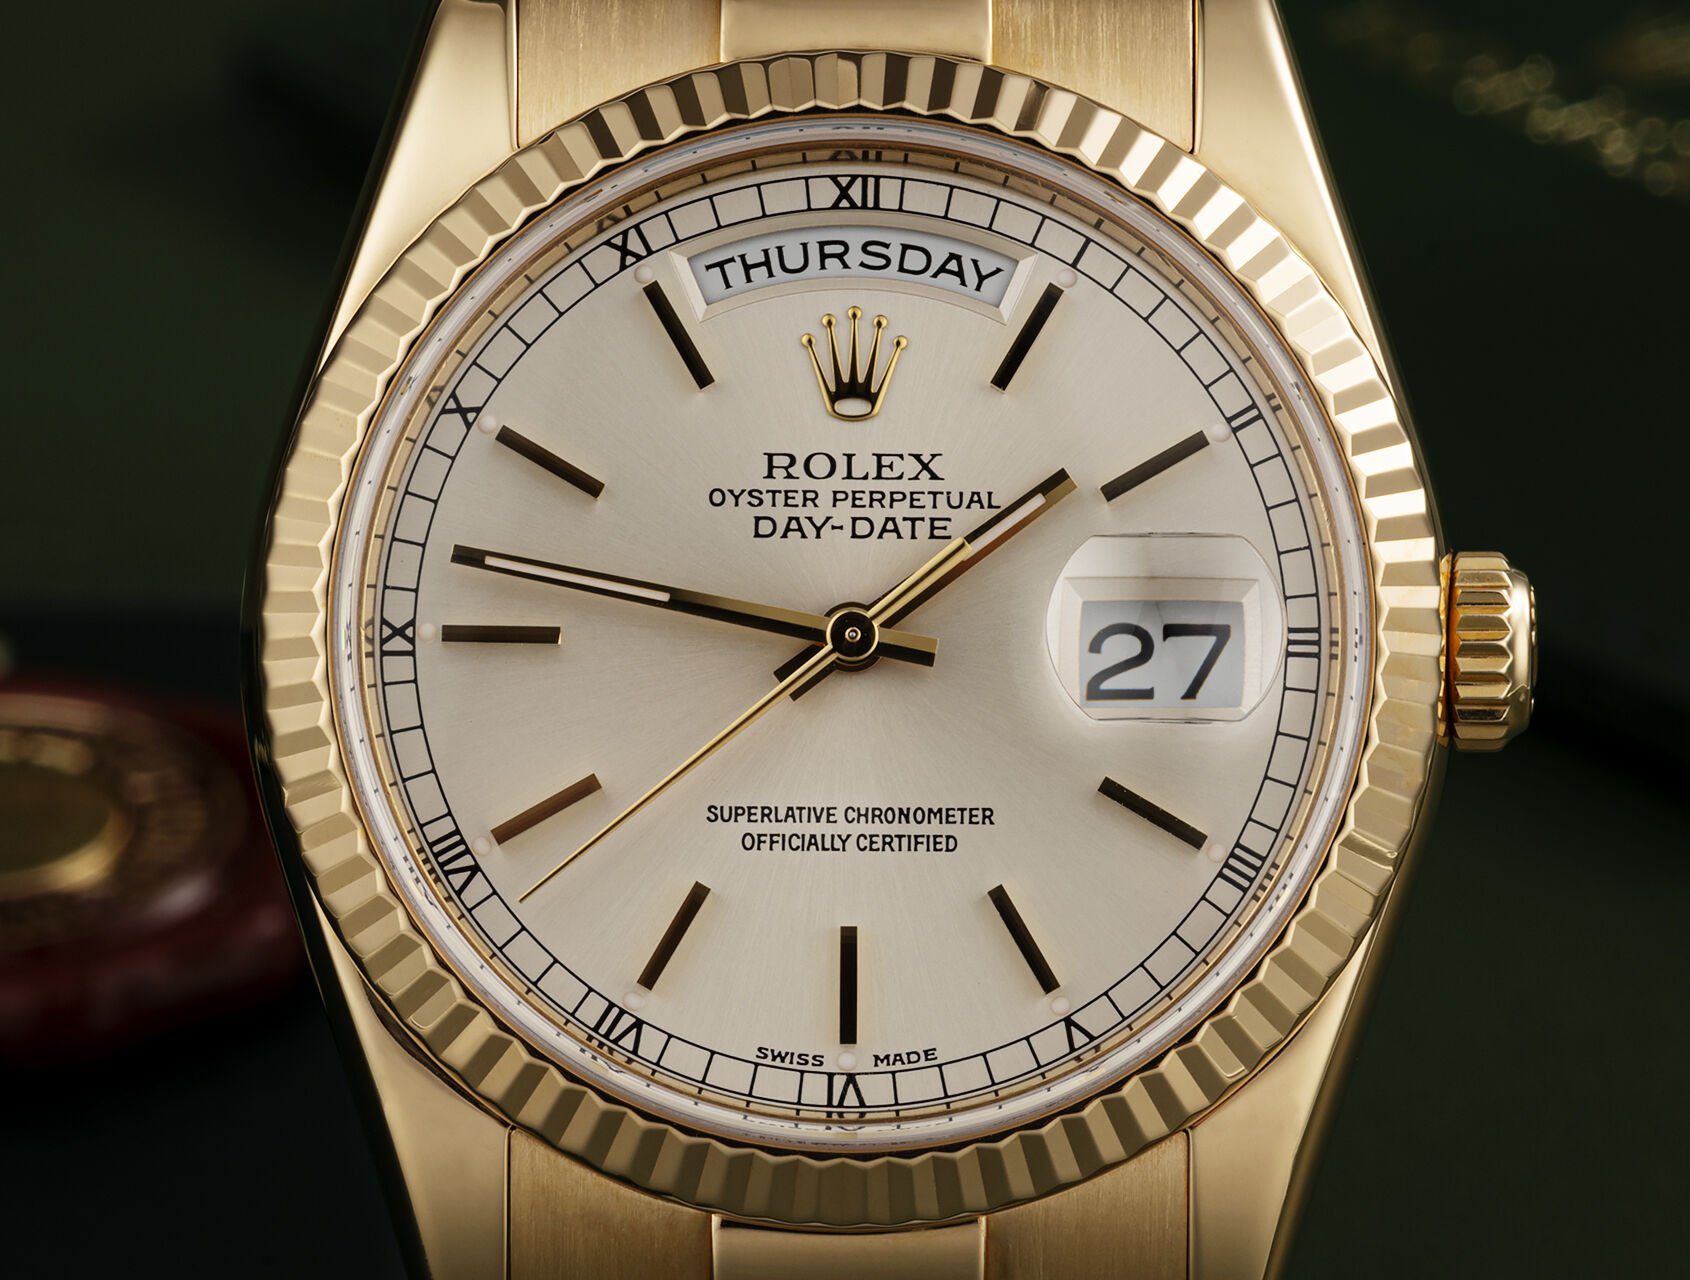 ref 118238 | 118238 - Box & Papers | Rolex Day-Date